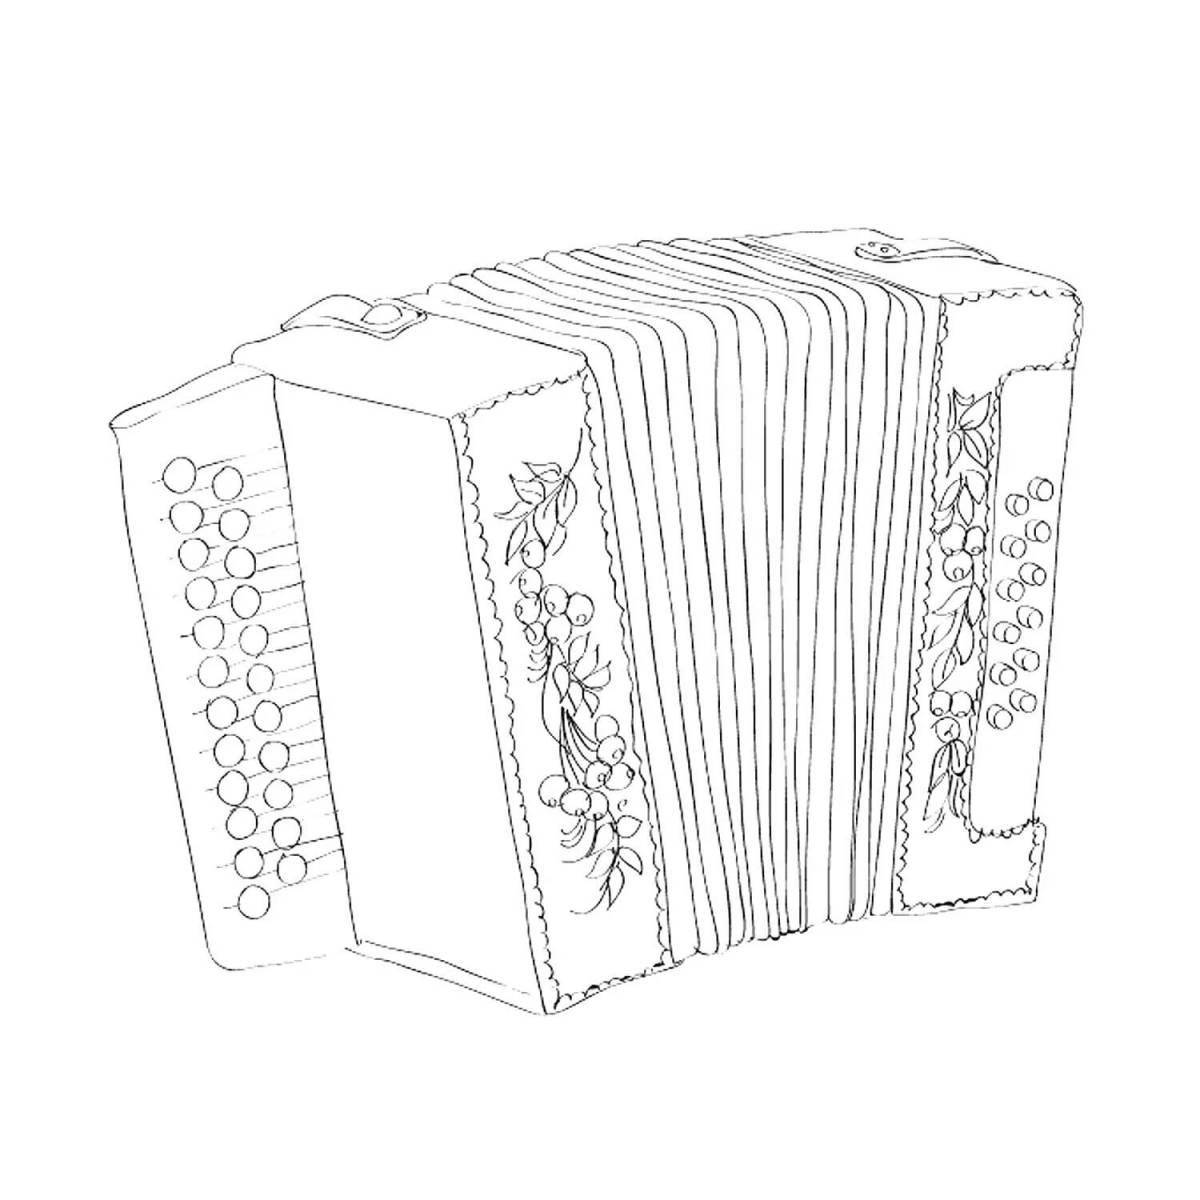 A bright accordion coloring book for the little ones